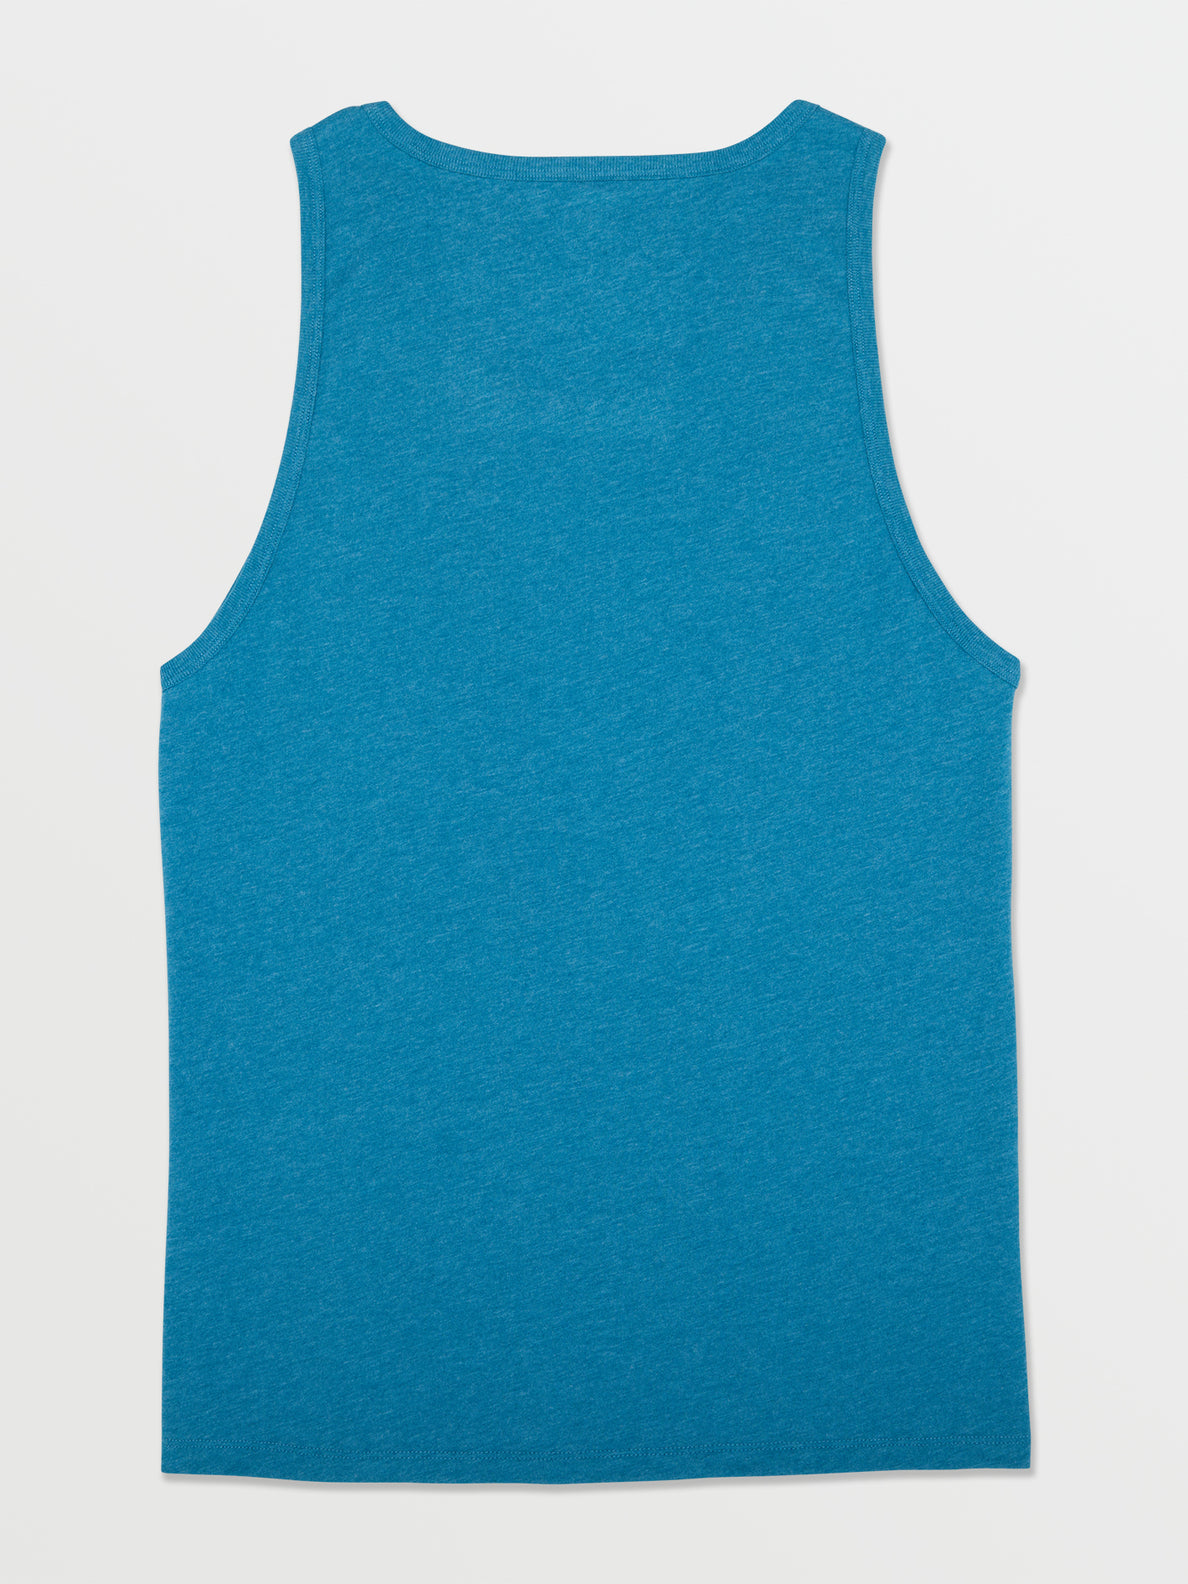 Solid Heather Tank - Stormy Blue (A4512302_STB) [B]